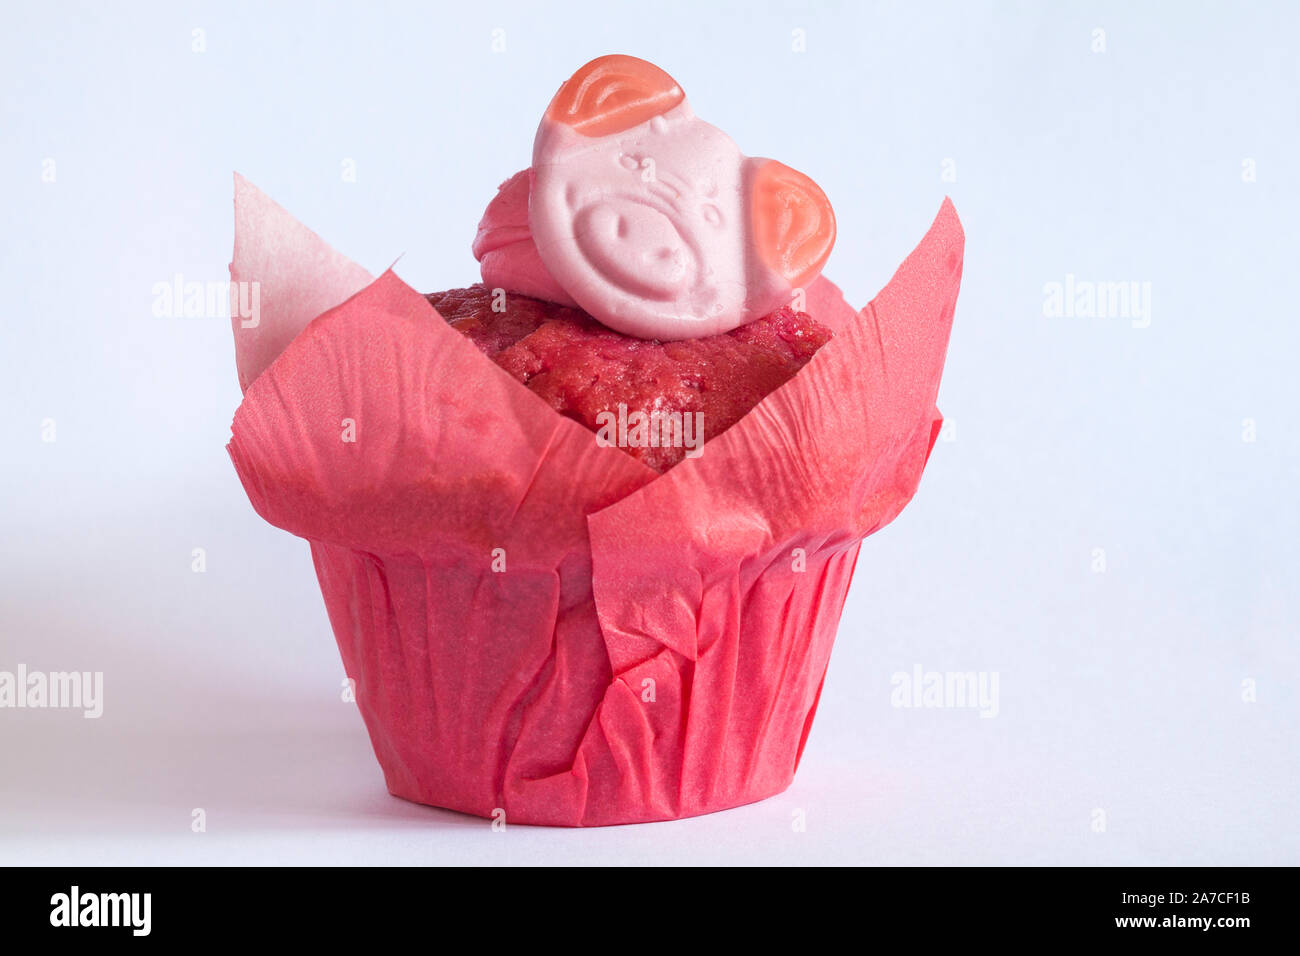 Percy Pig heart sweet muffin fresh from M&S in-store bakery isolated on white background Stock Photo